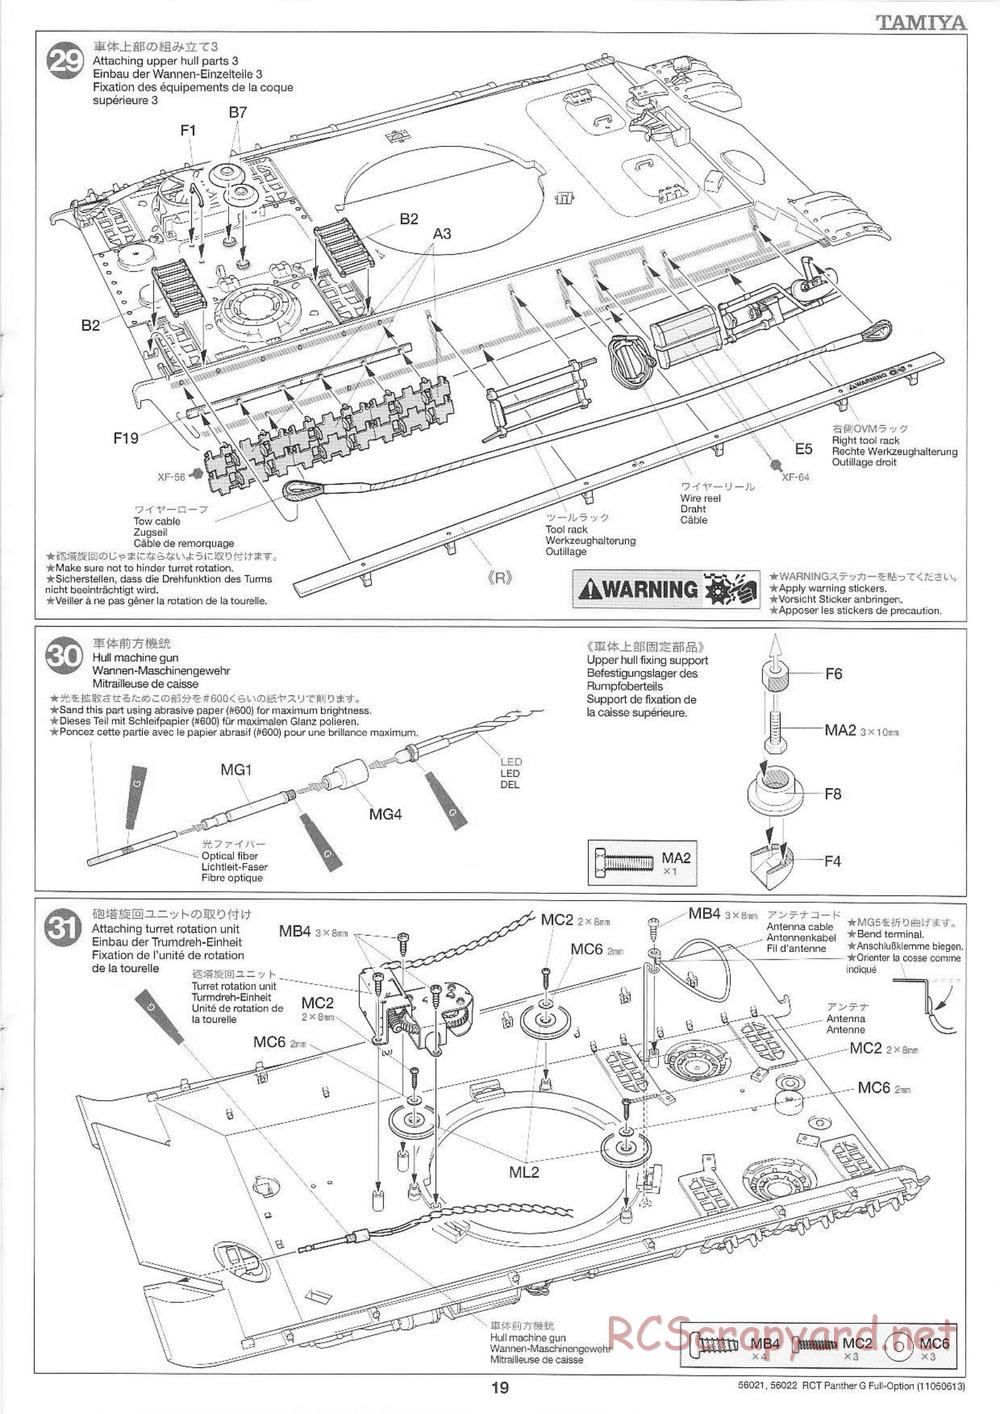 Tamiya - Panther Type G - 1/16 Scale Chassis - Manual - Page 19